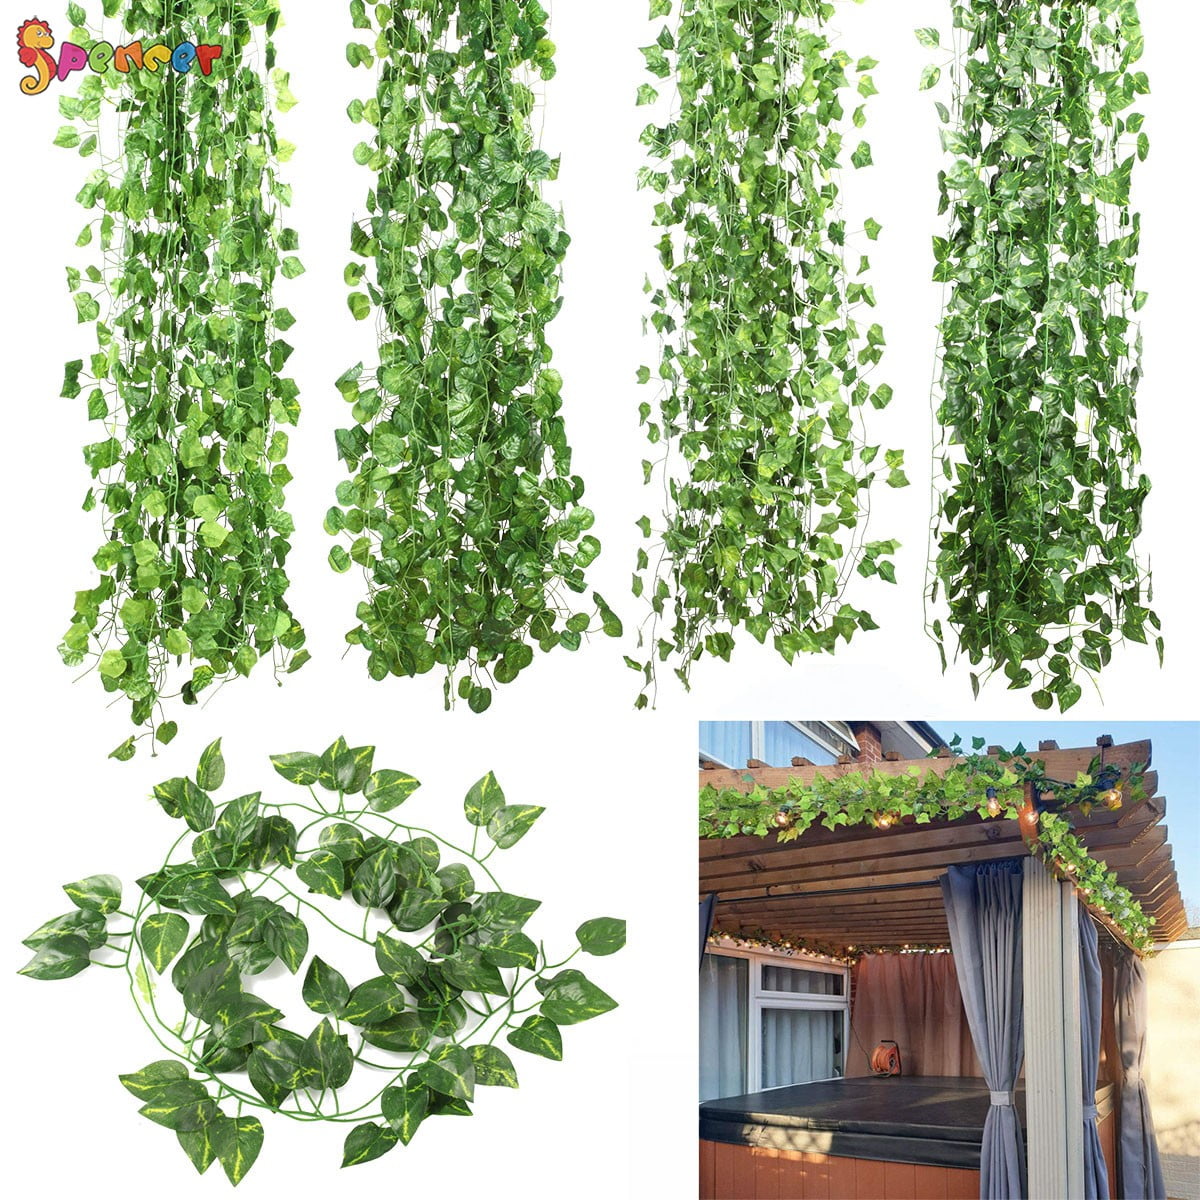 Artiflr 12 Pack 84 Feet Artificial Fake Hanging Vines Plant Garlands Home Office Garden Outdoor Wall Greenery Cover Jungle Party Decoration